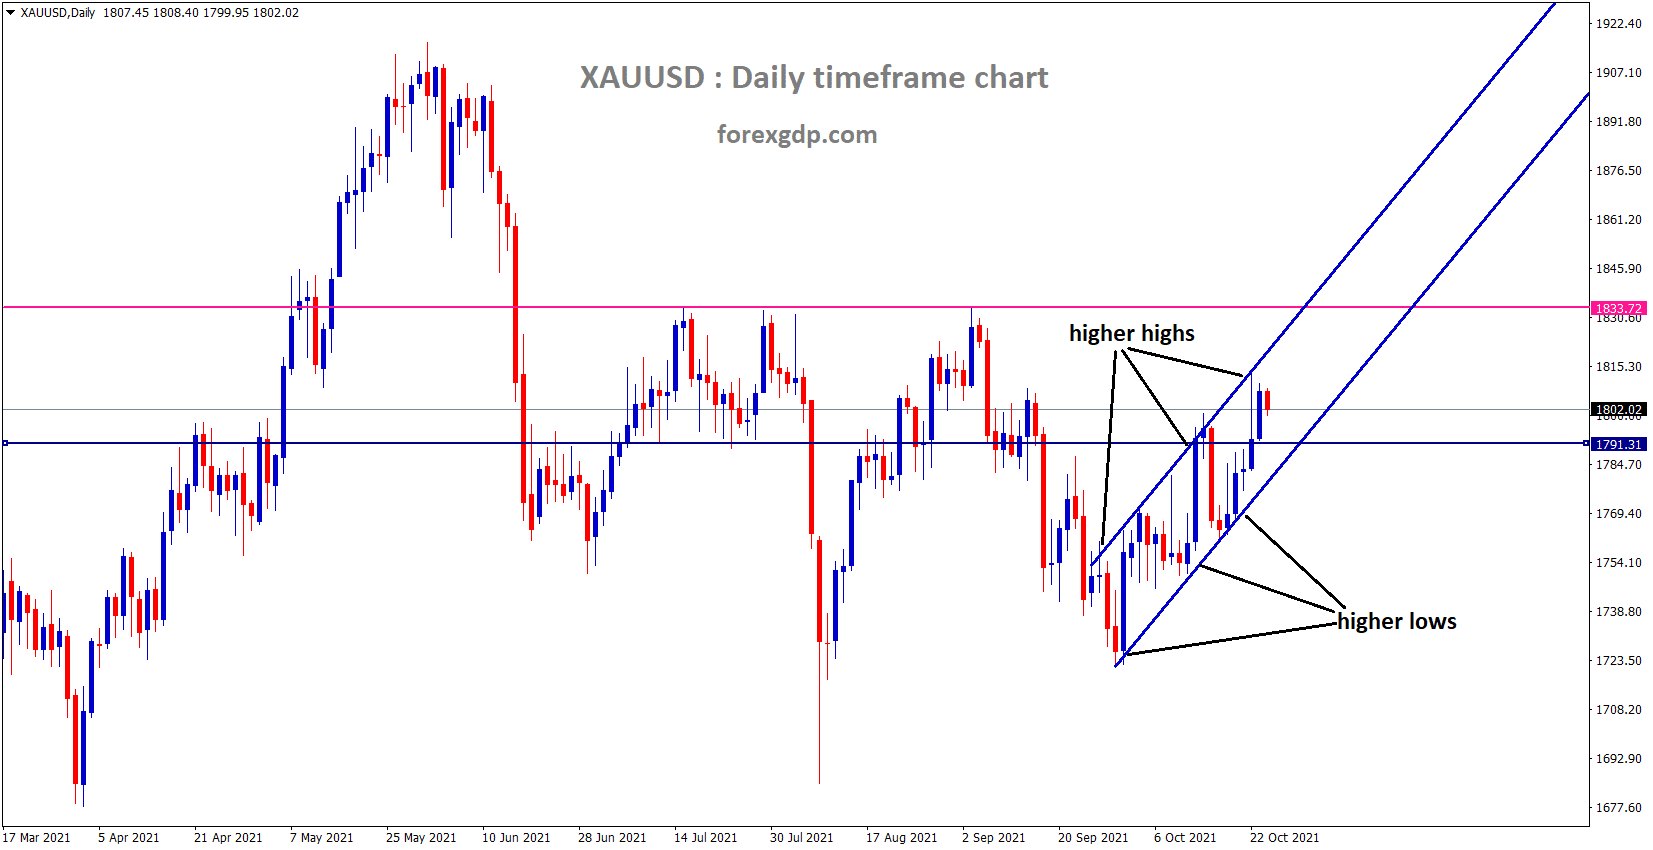 XAUUSD Gold price moving in an Ascending channel and price standing at higher high area.